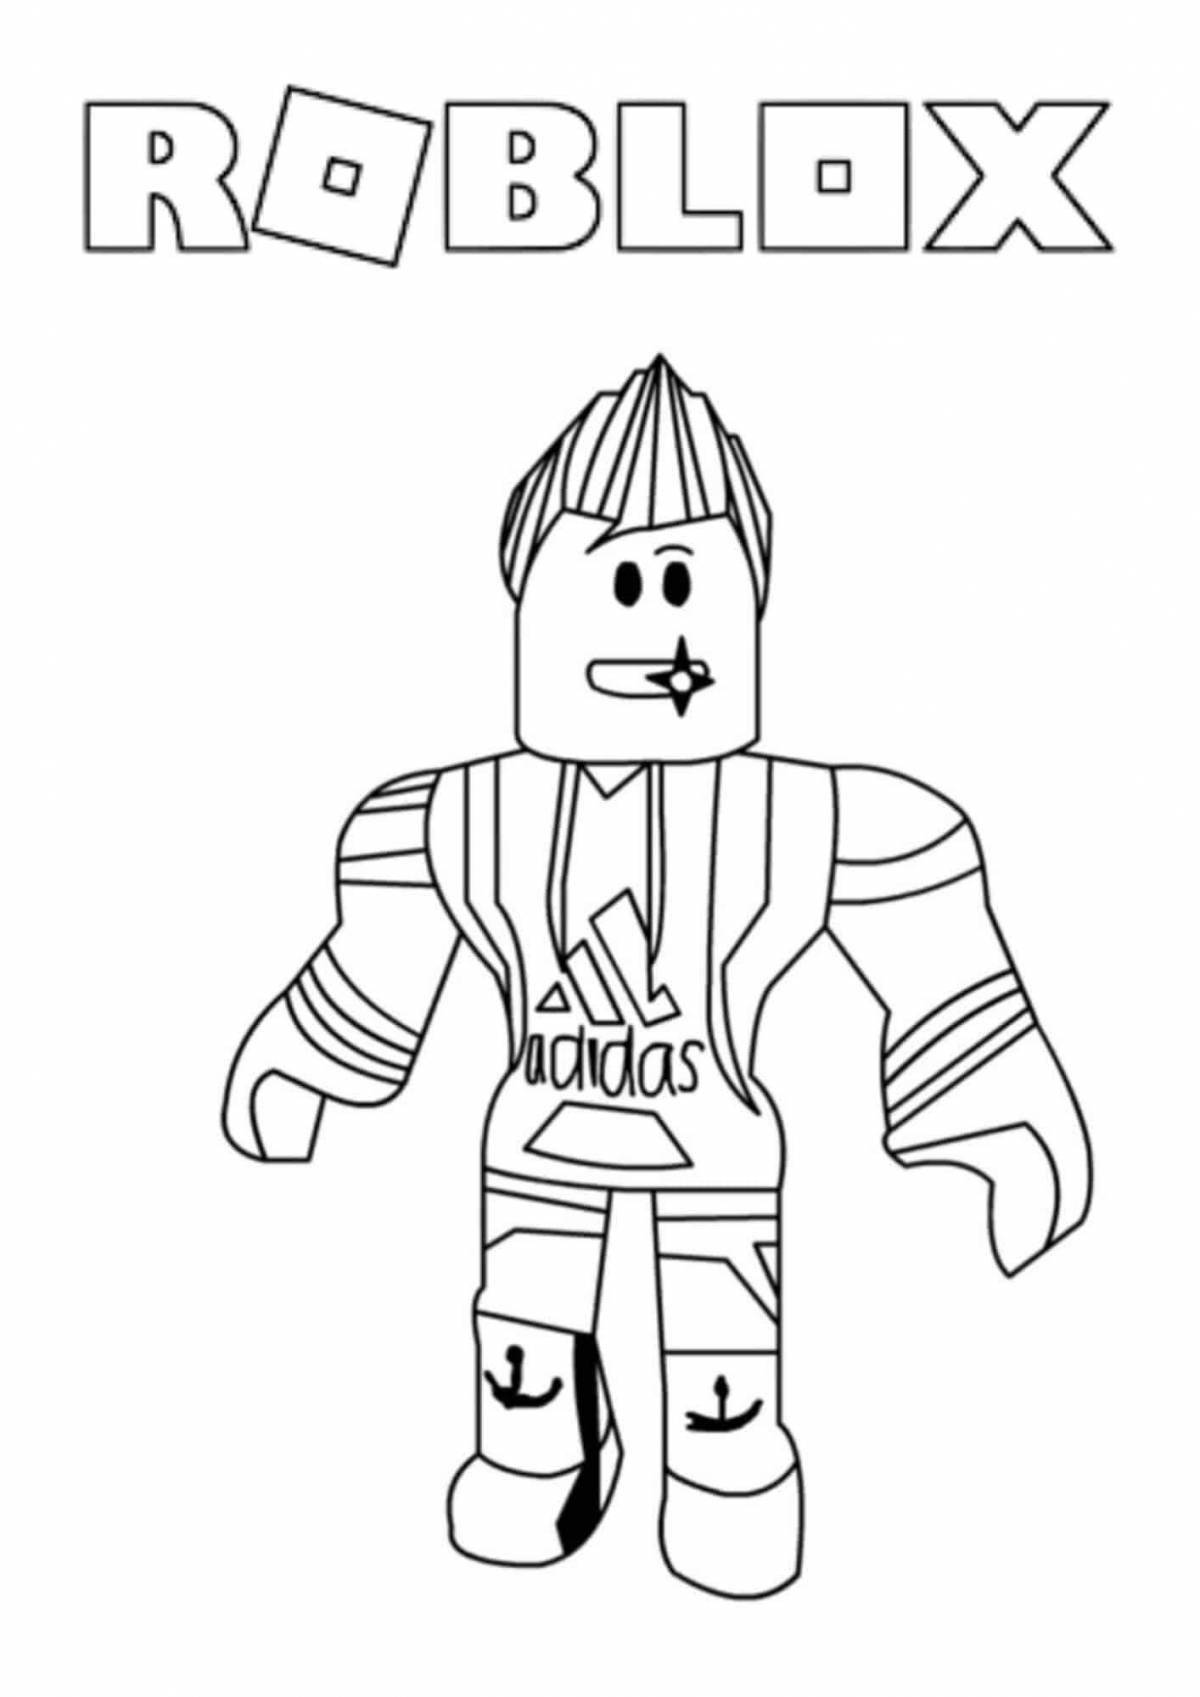 Exciting coloring roblox player